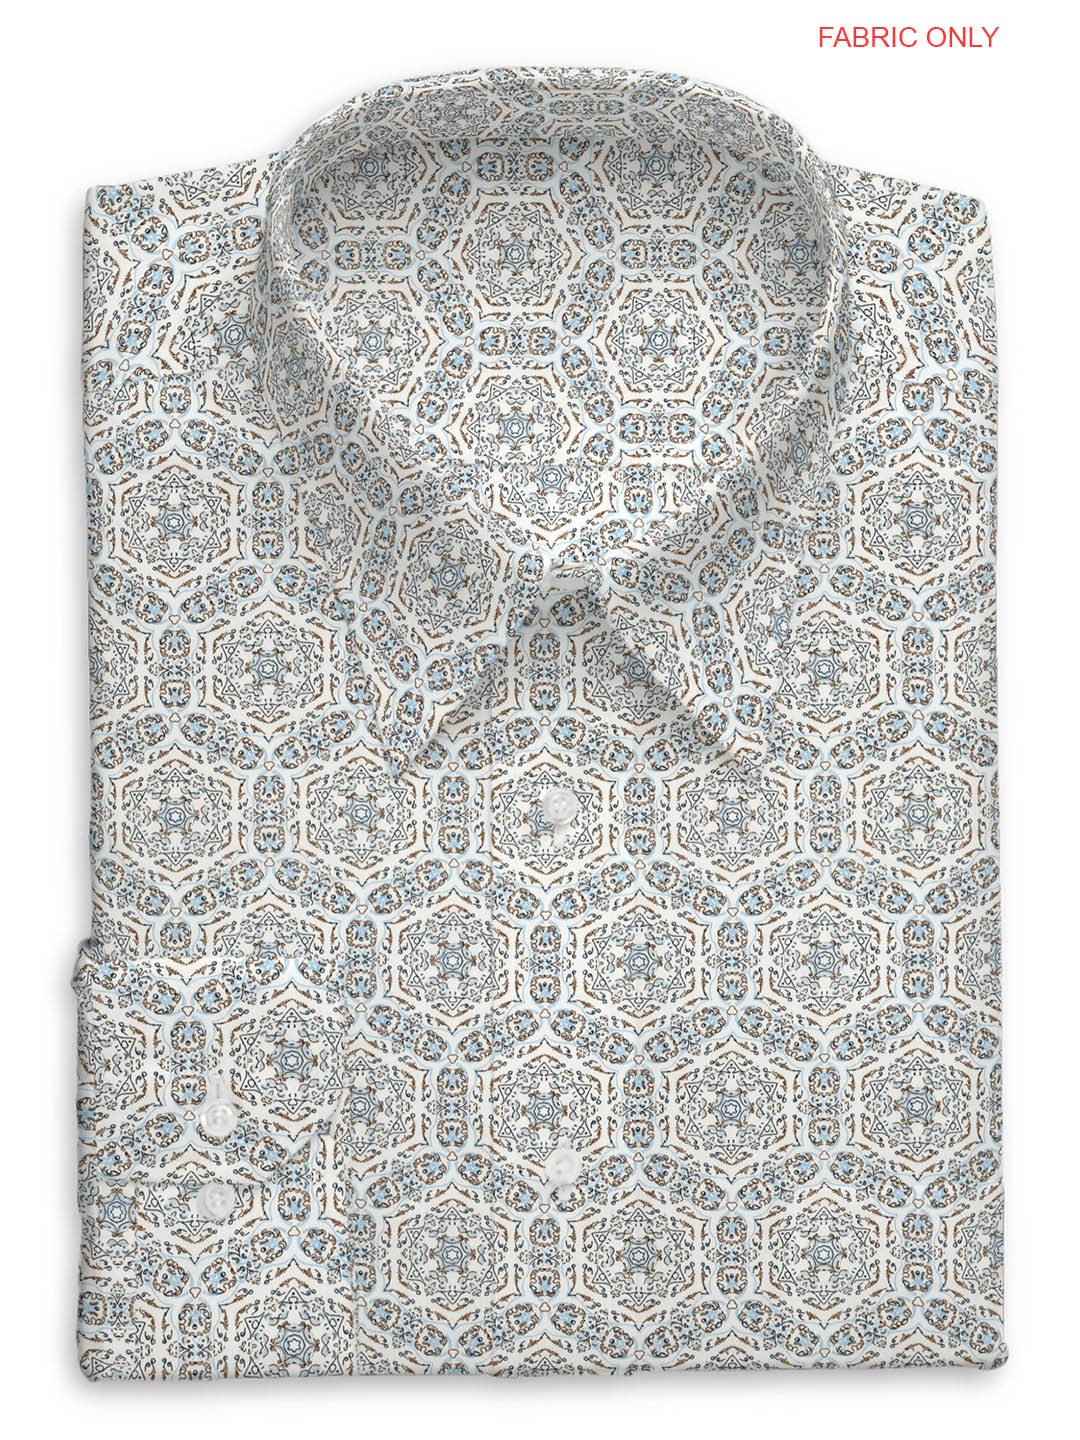 Cotton White with Blue All-over Print Shirt Fabric OSLO